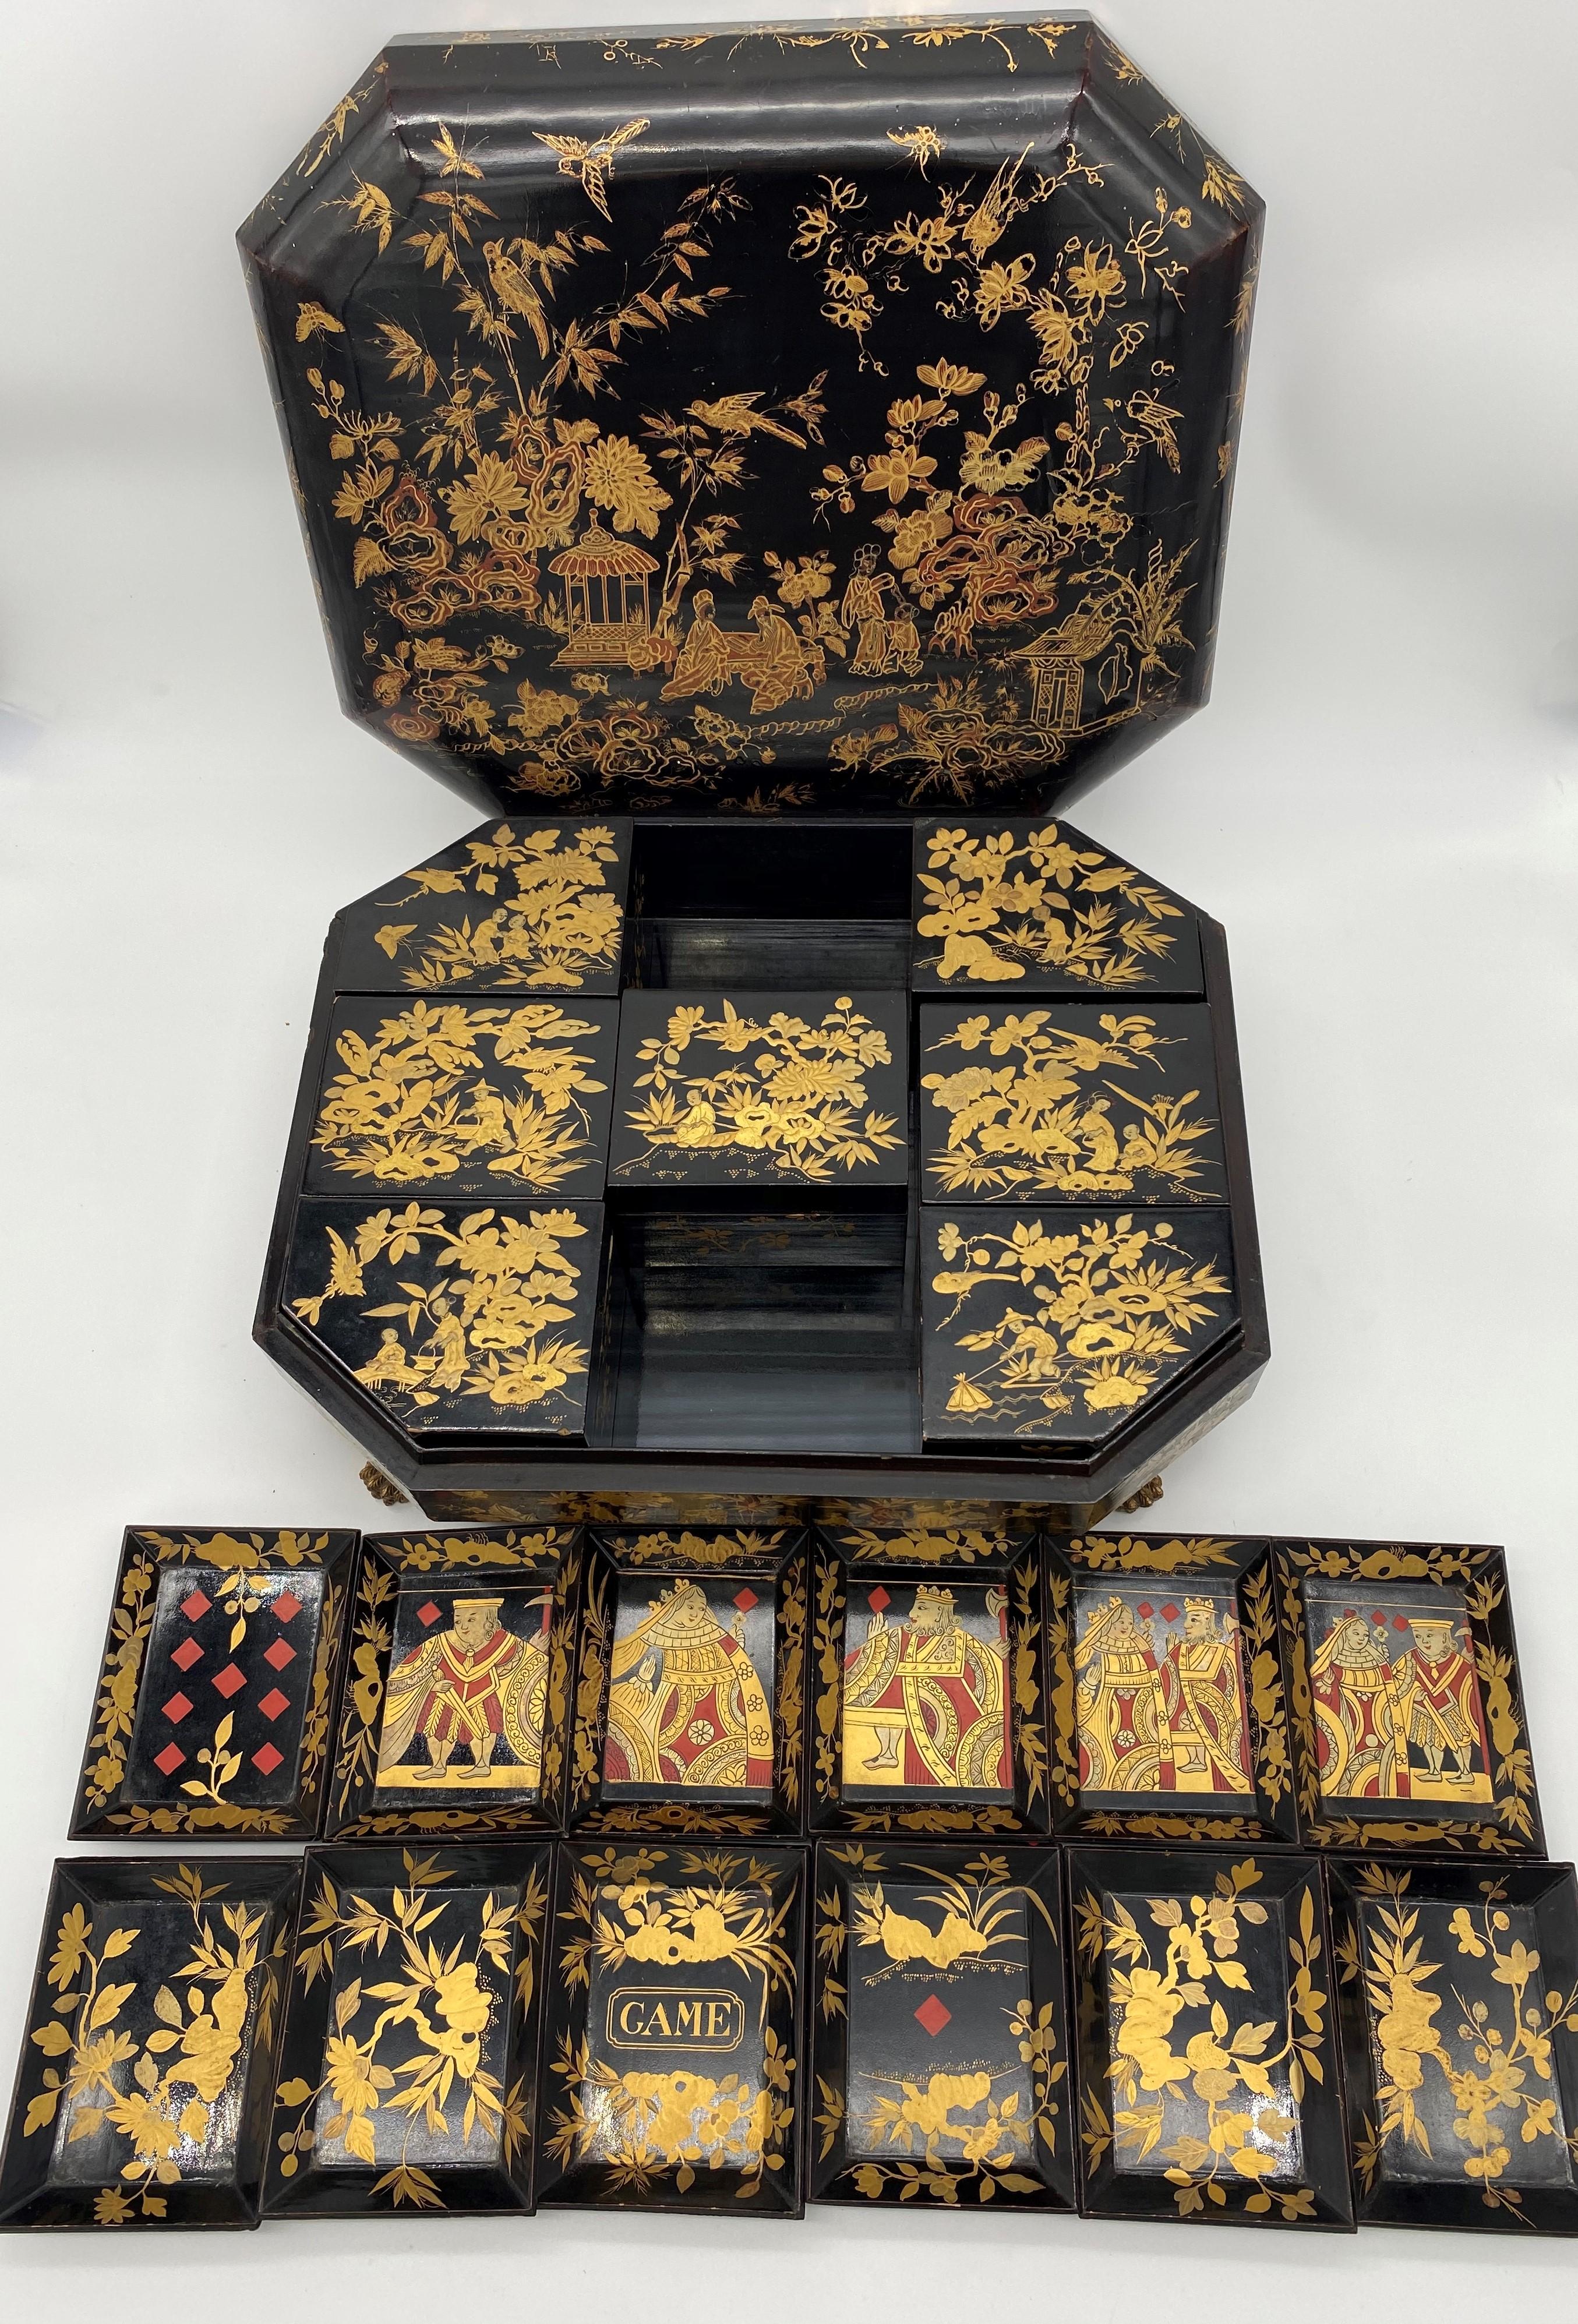 Antique 18th century export Chinese lacquer gaming box with hand painted scenes gilt export black lacquer, there are 7 gaming boxes and 12 trays, size: 15inch x 12 x 4.5.